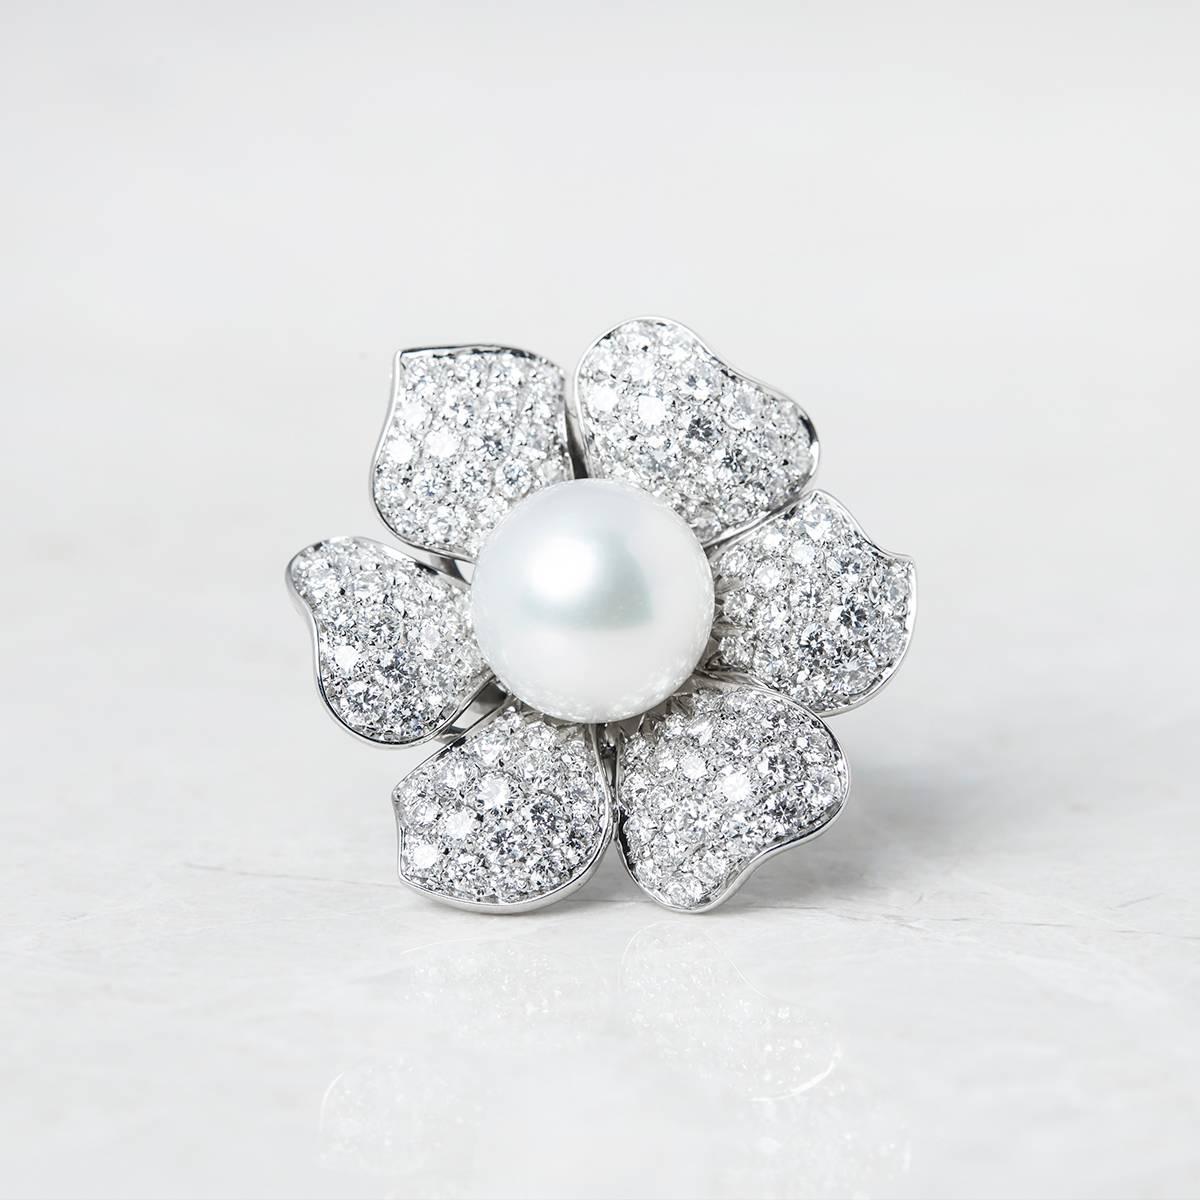 Code: J431
Brand: Picchiotti Style
Description: 18k White Gold South Sea Pearl & 3.60ct Diamond Flower Design Cocktail Ring
Accompanied With: Presentation Box
Gender: Ladies
UK Ring Size: K 1/2
EU Ring Size: 51
US Ring Size: 5 1/2
Resizing